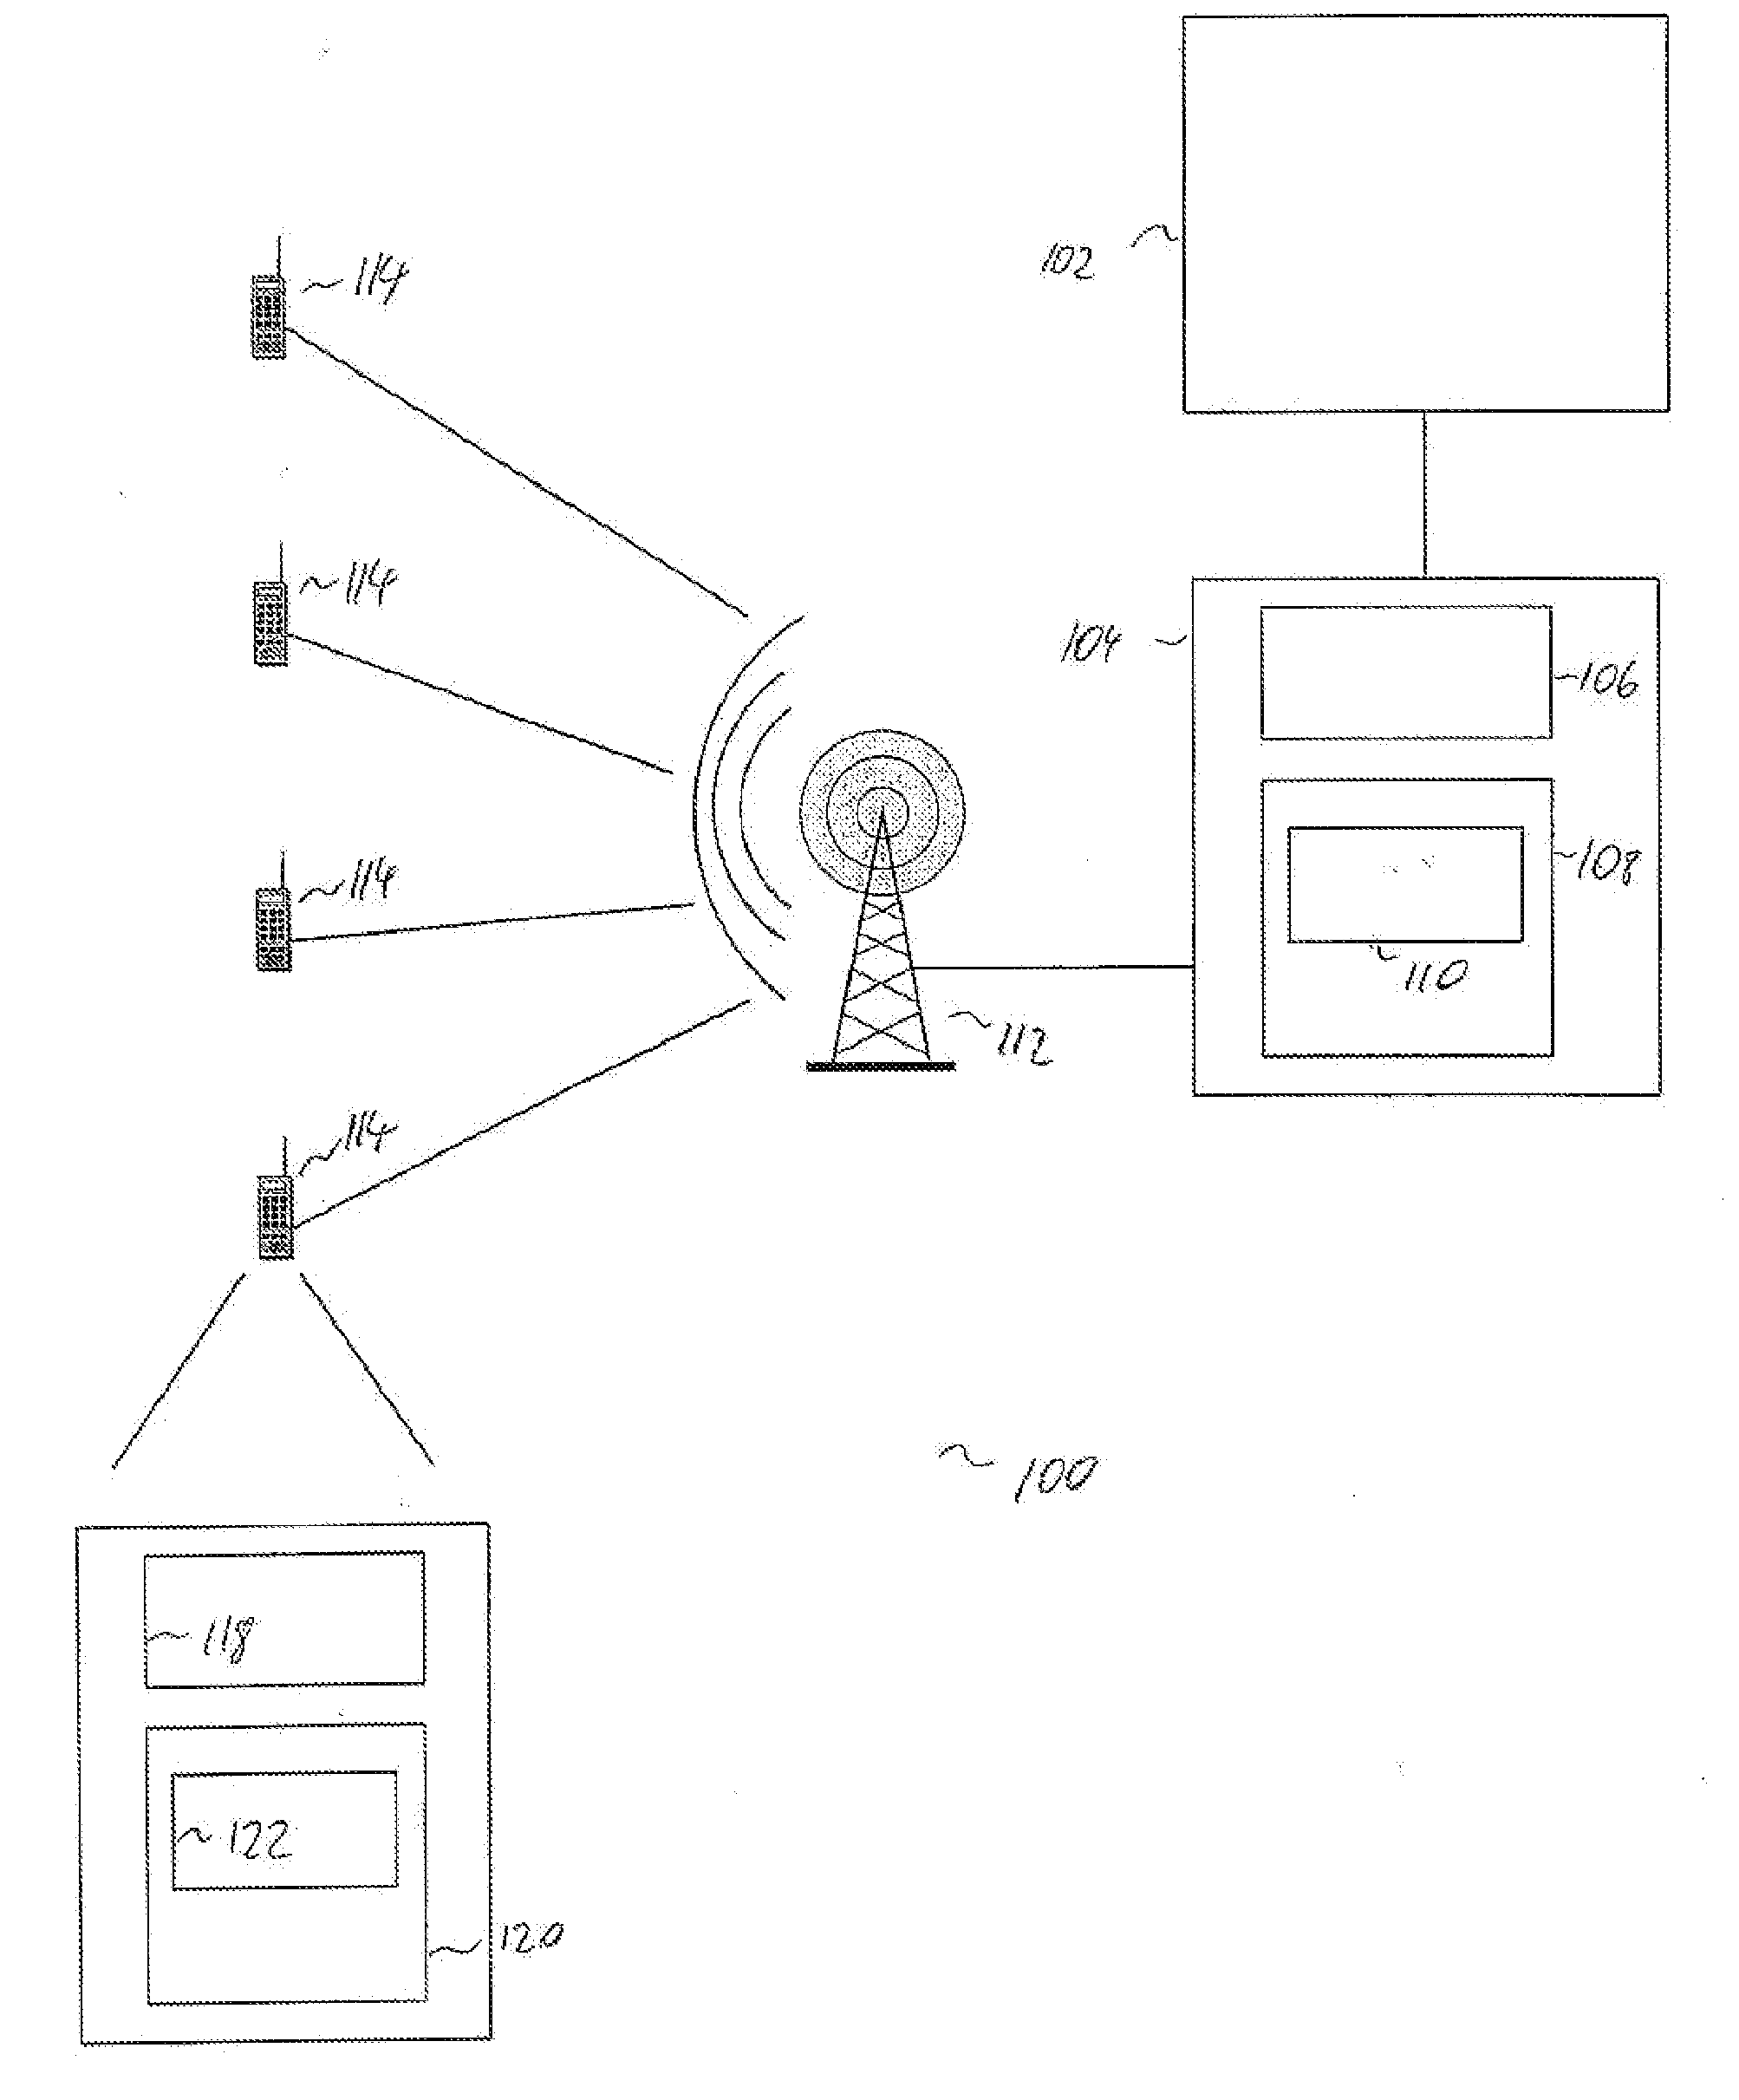 Method for counting a number of mobile stations in a radio access network